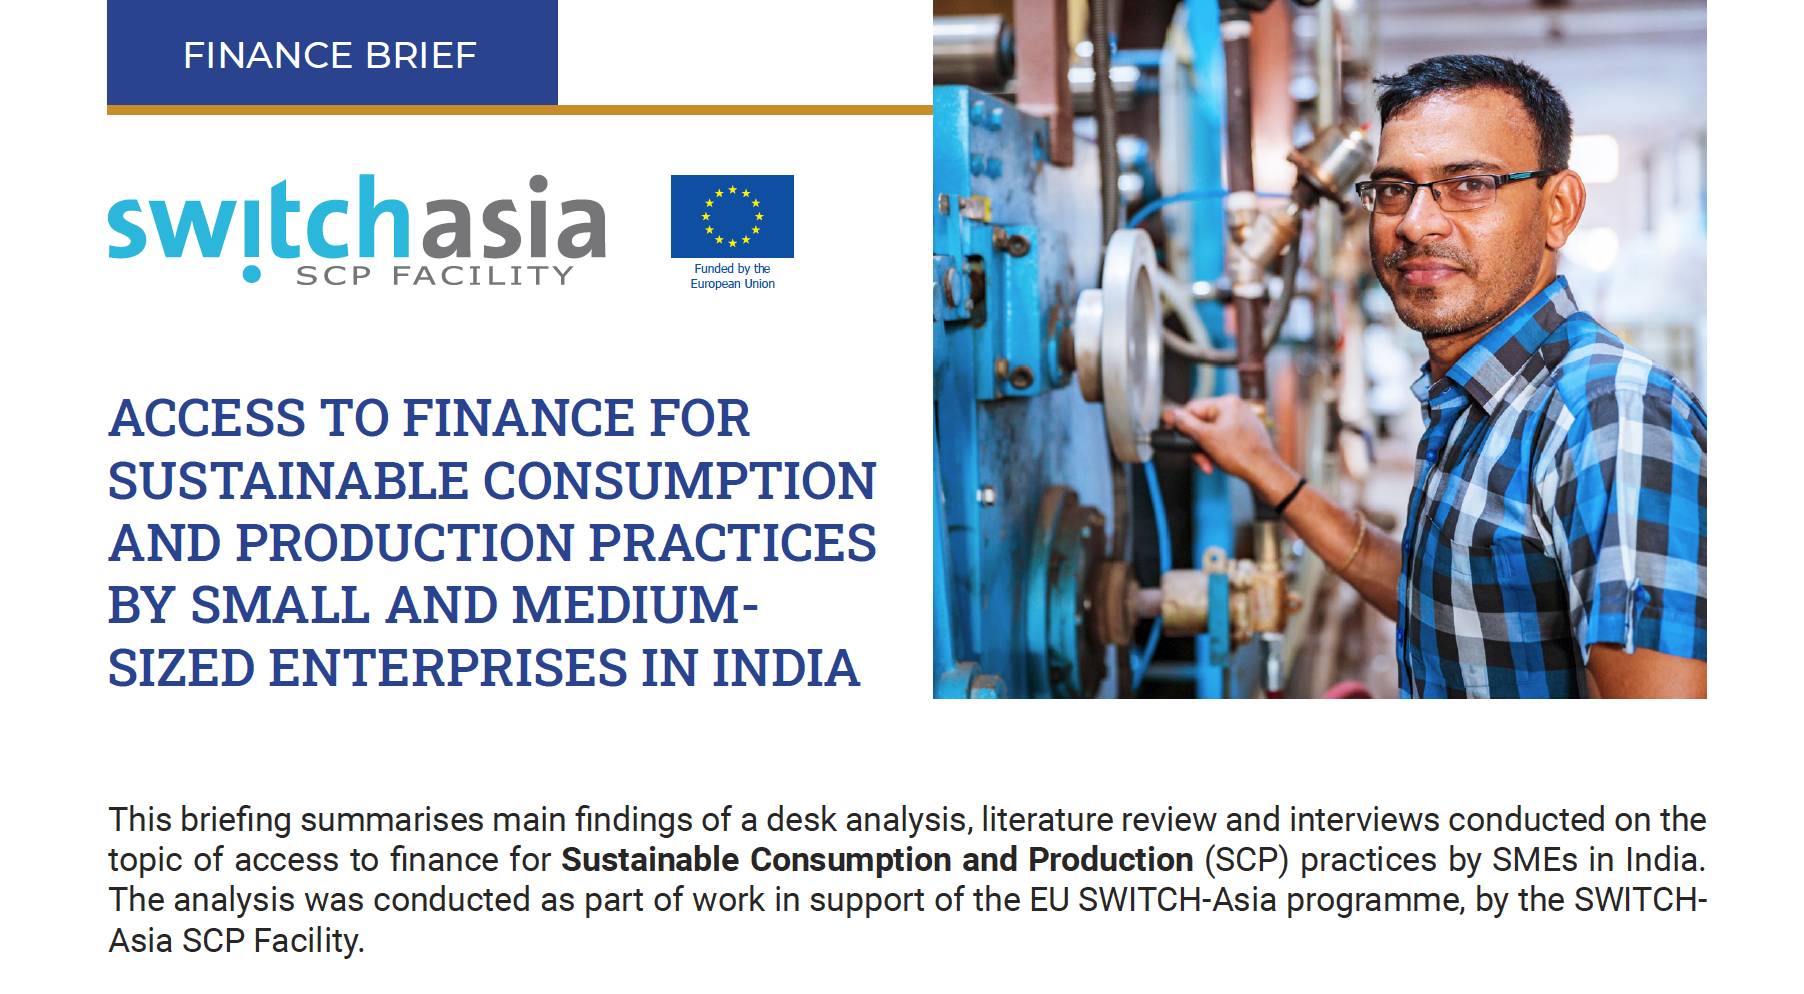 Access to Finance for SCP Practices by Small and Medium-sized Enterprises in India